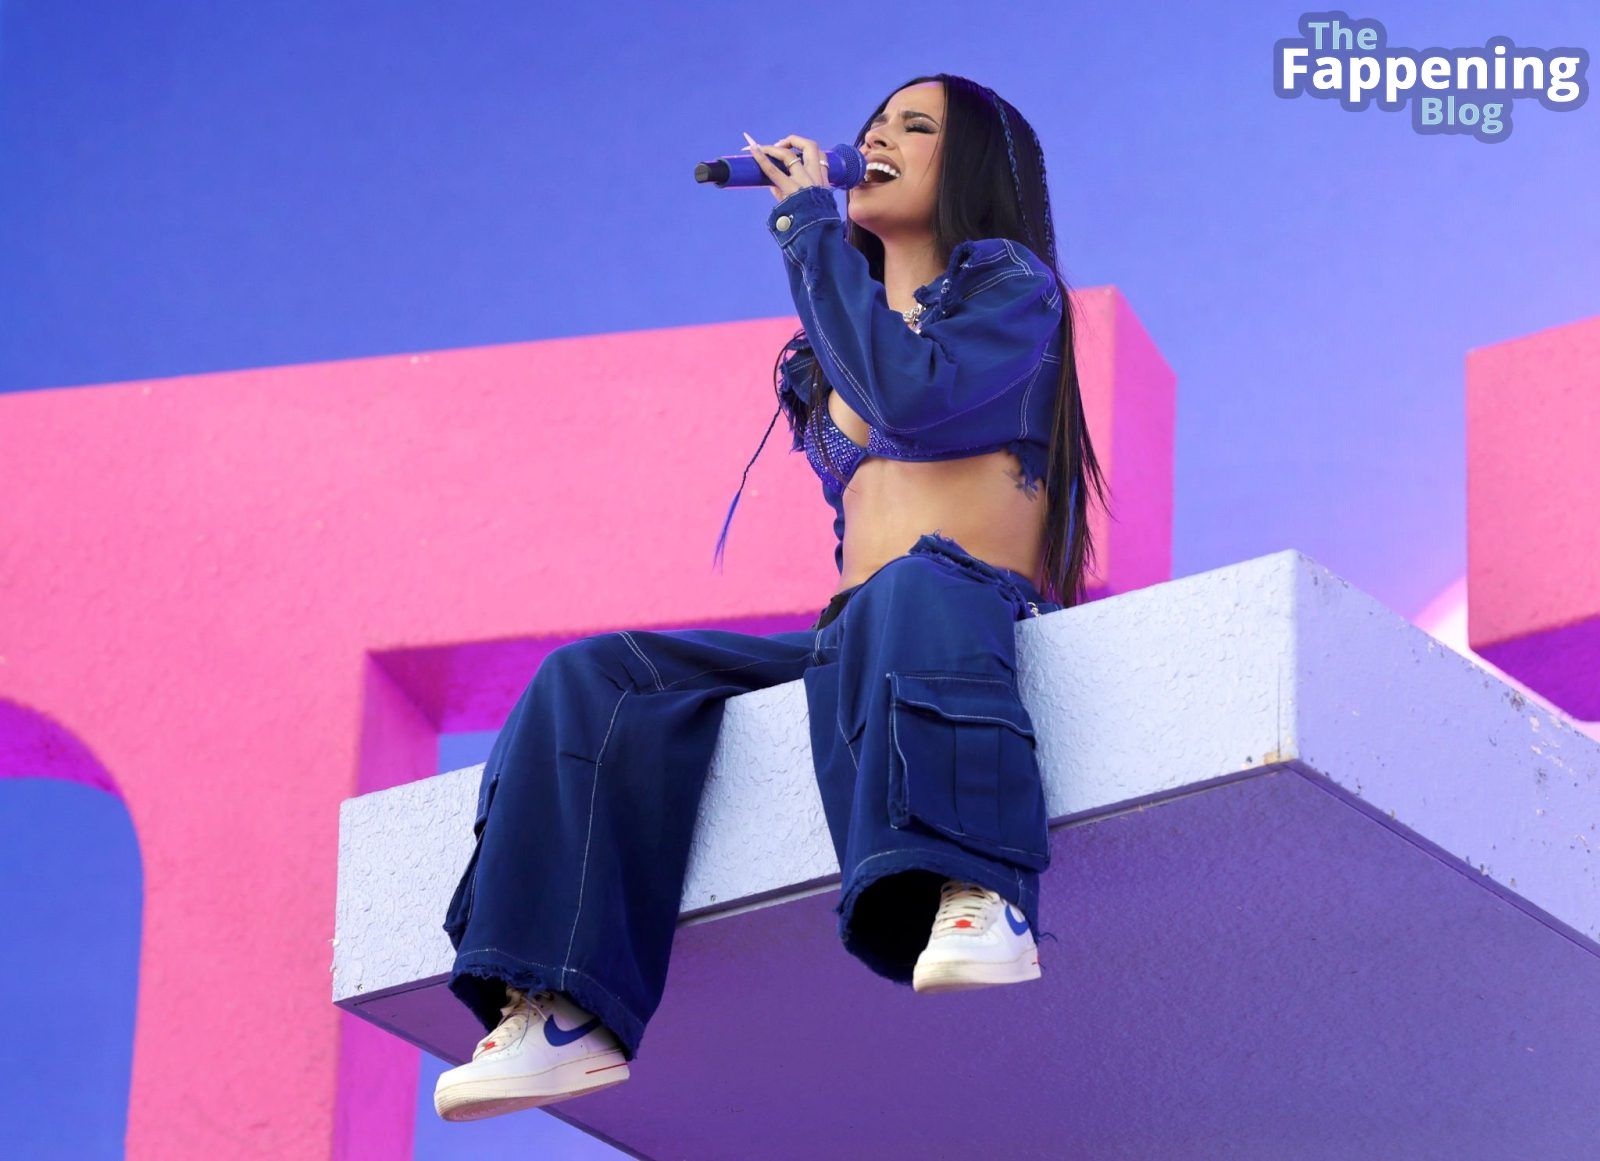 Becky G Looks Stunning While Performing at Coachella in Indio (30 Photos)